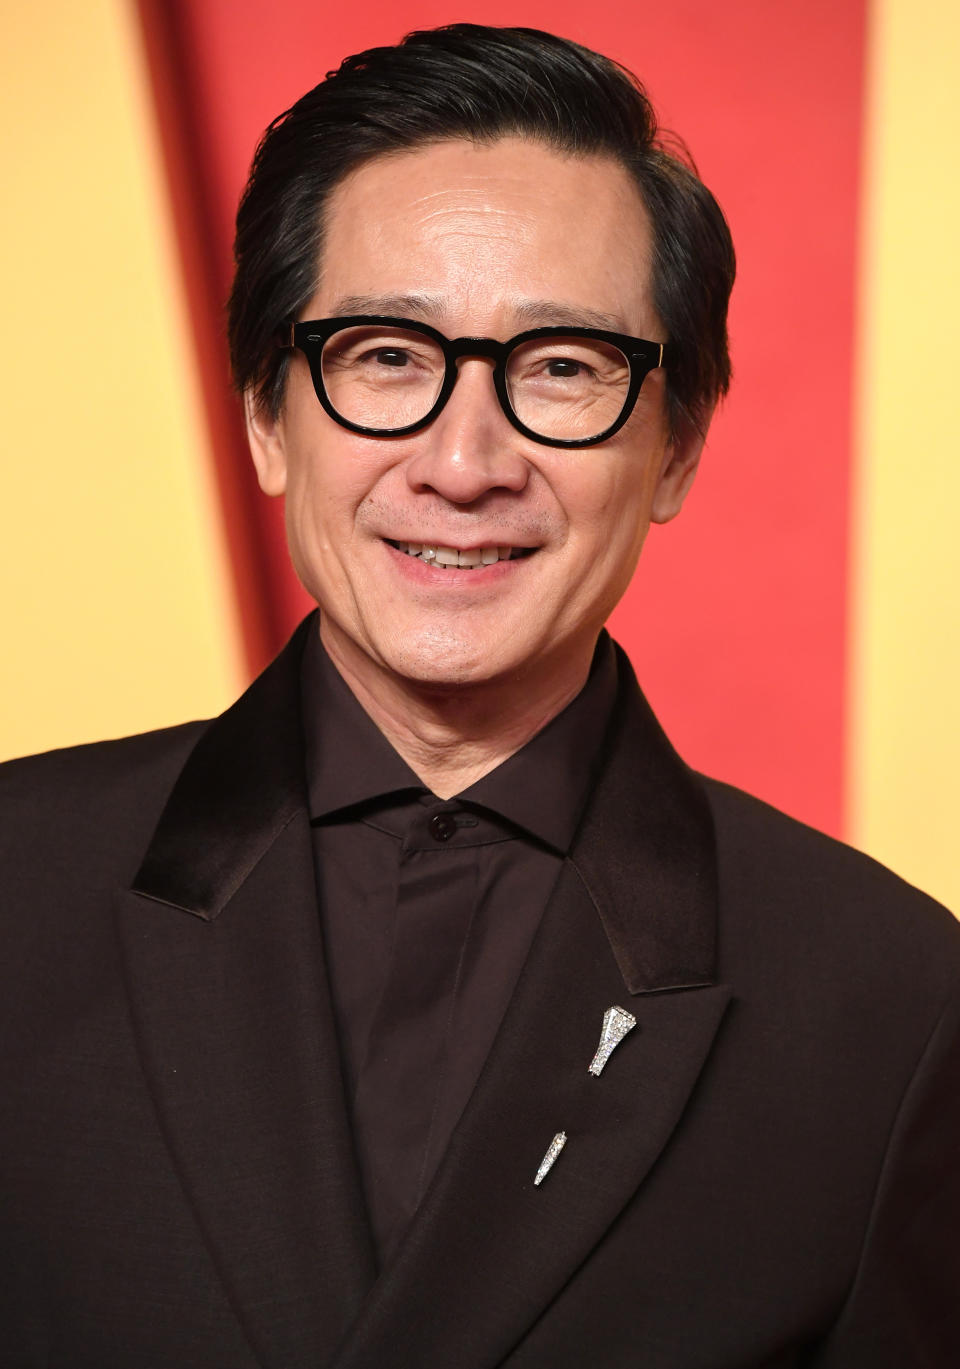 Person wearing glasses and a dark suit with a black satin lapel and a decorative pin, smiling on a patterned background